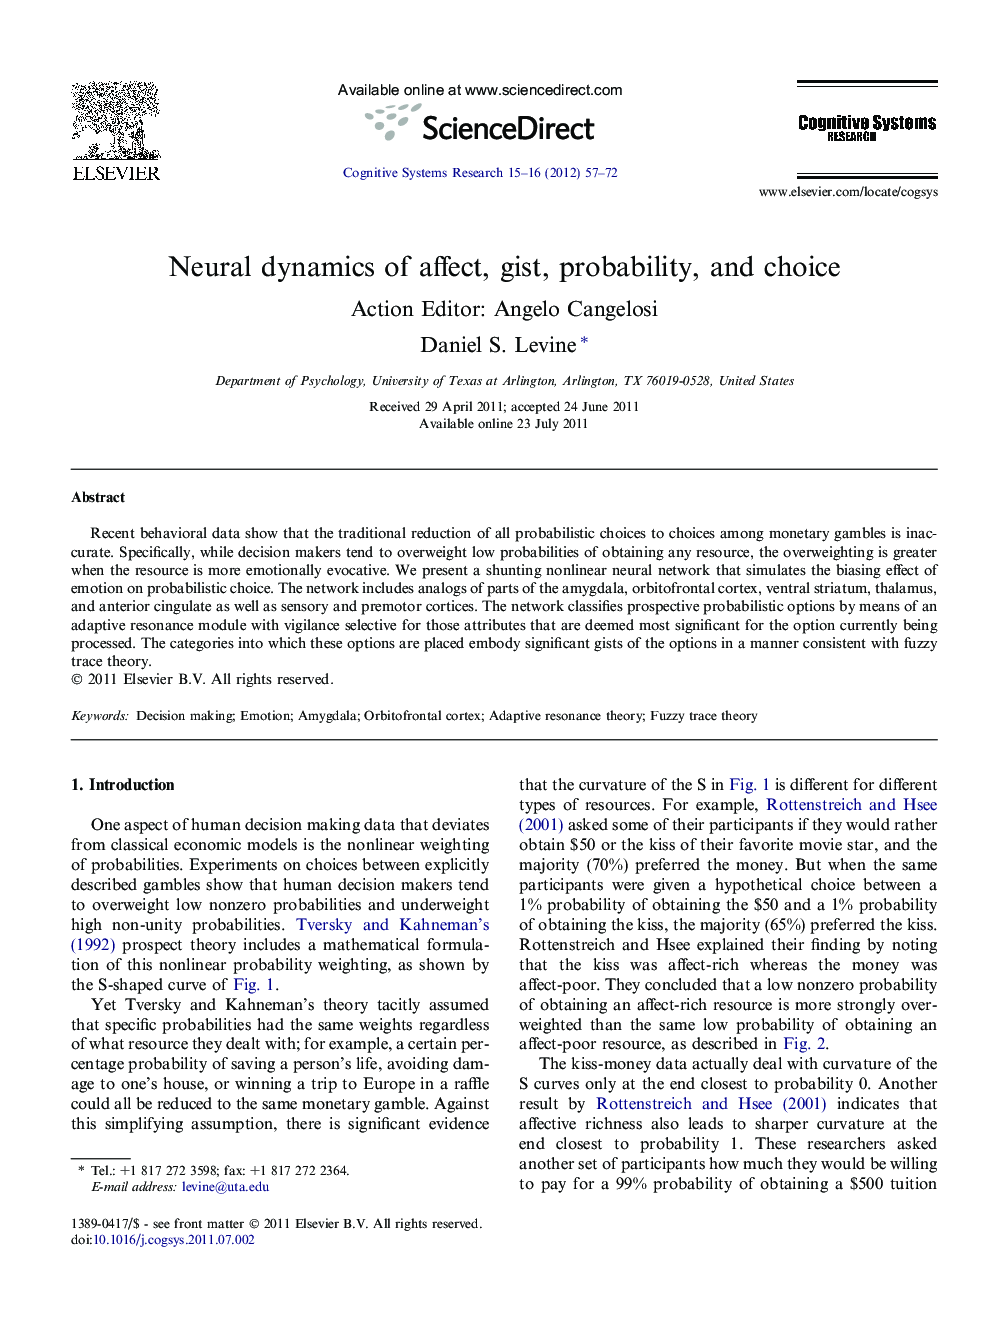 Neural dynamics of affect, gist, probability, and choice